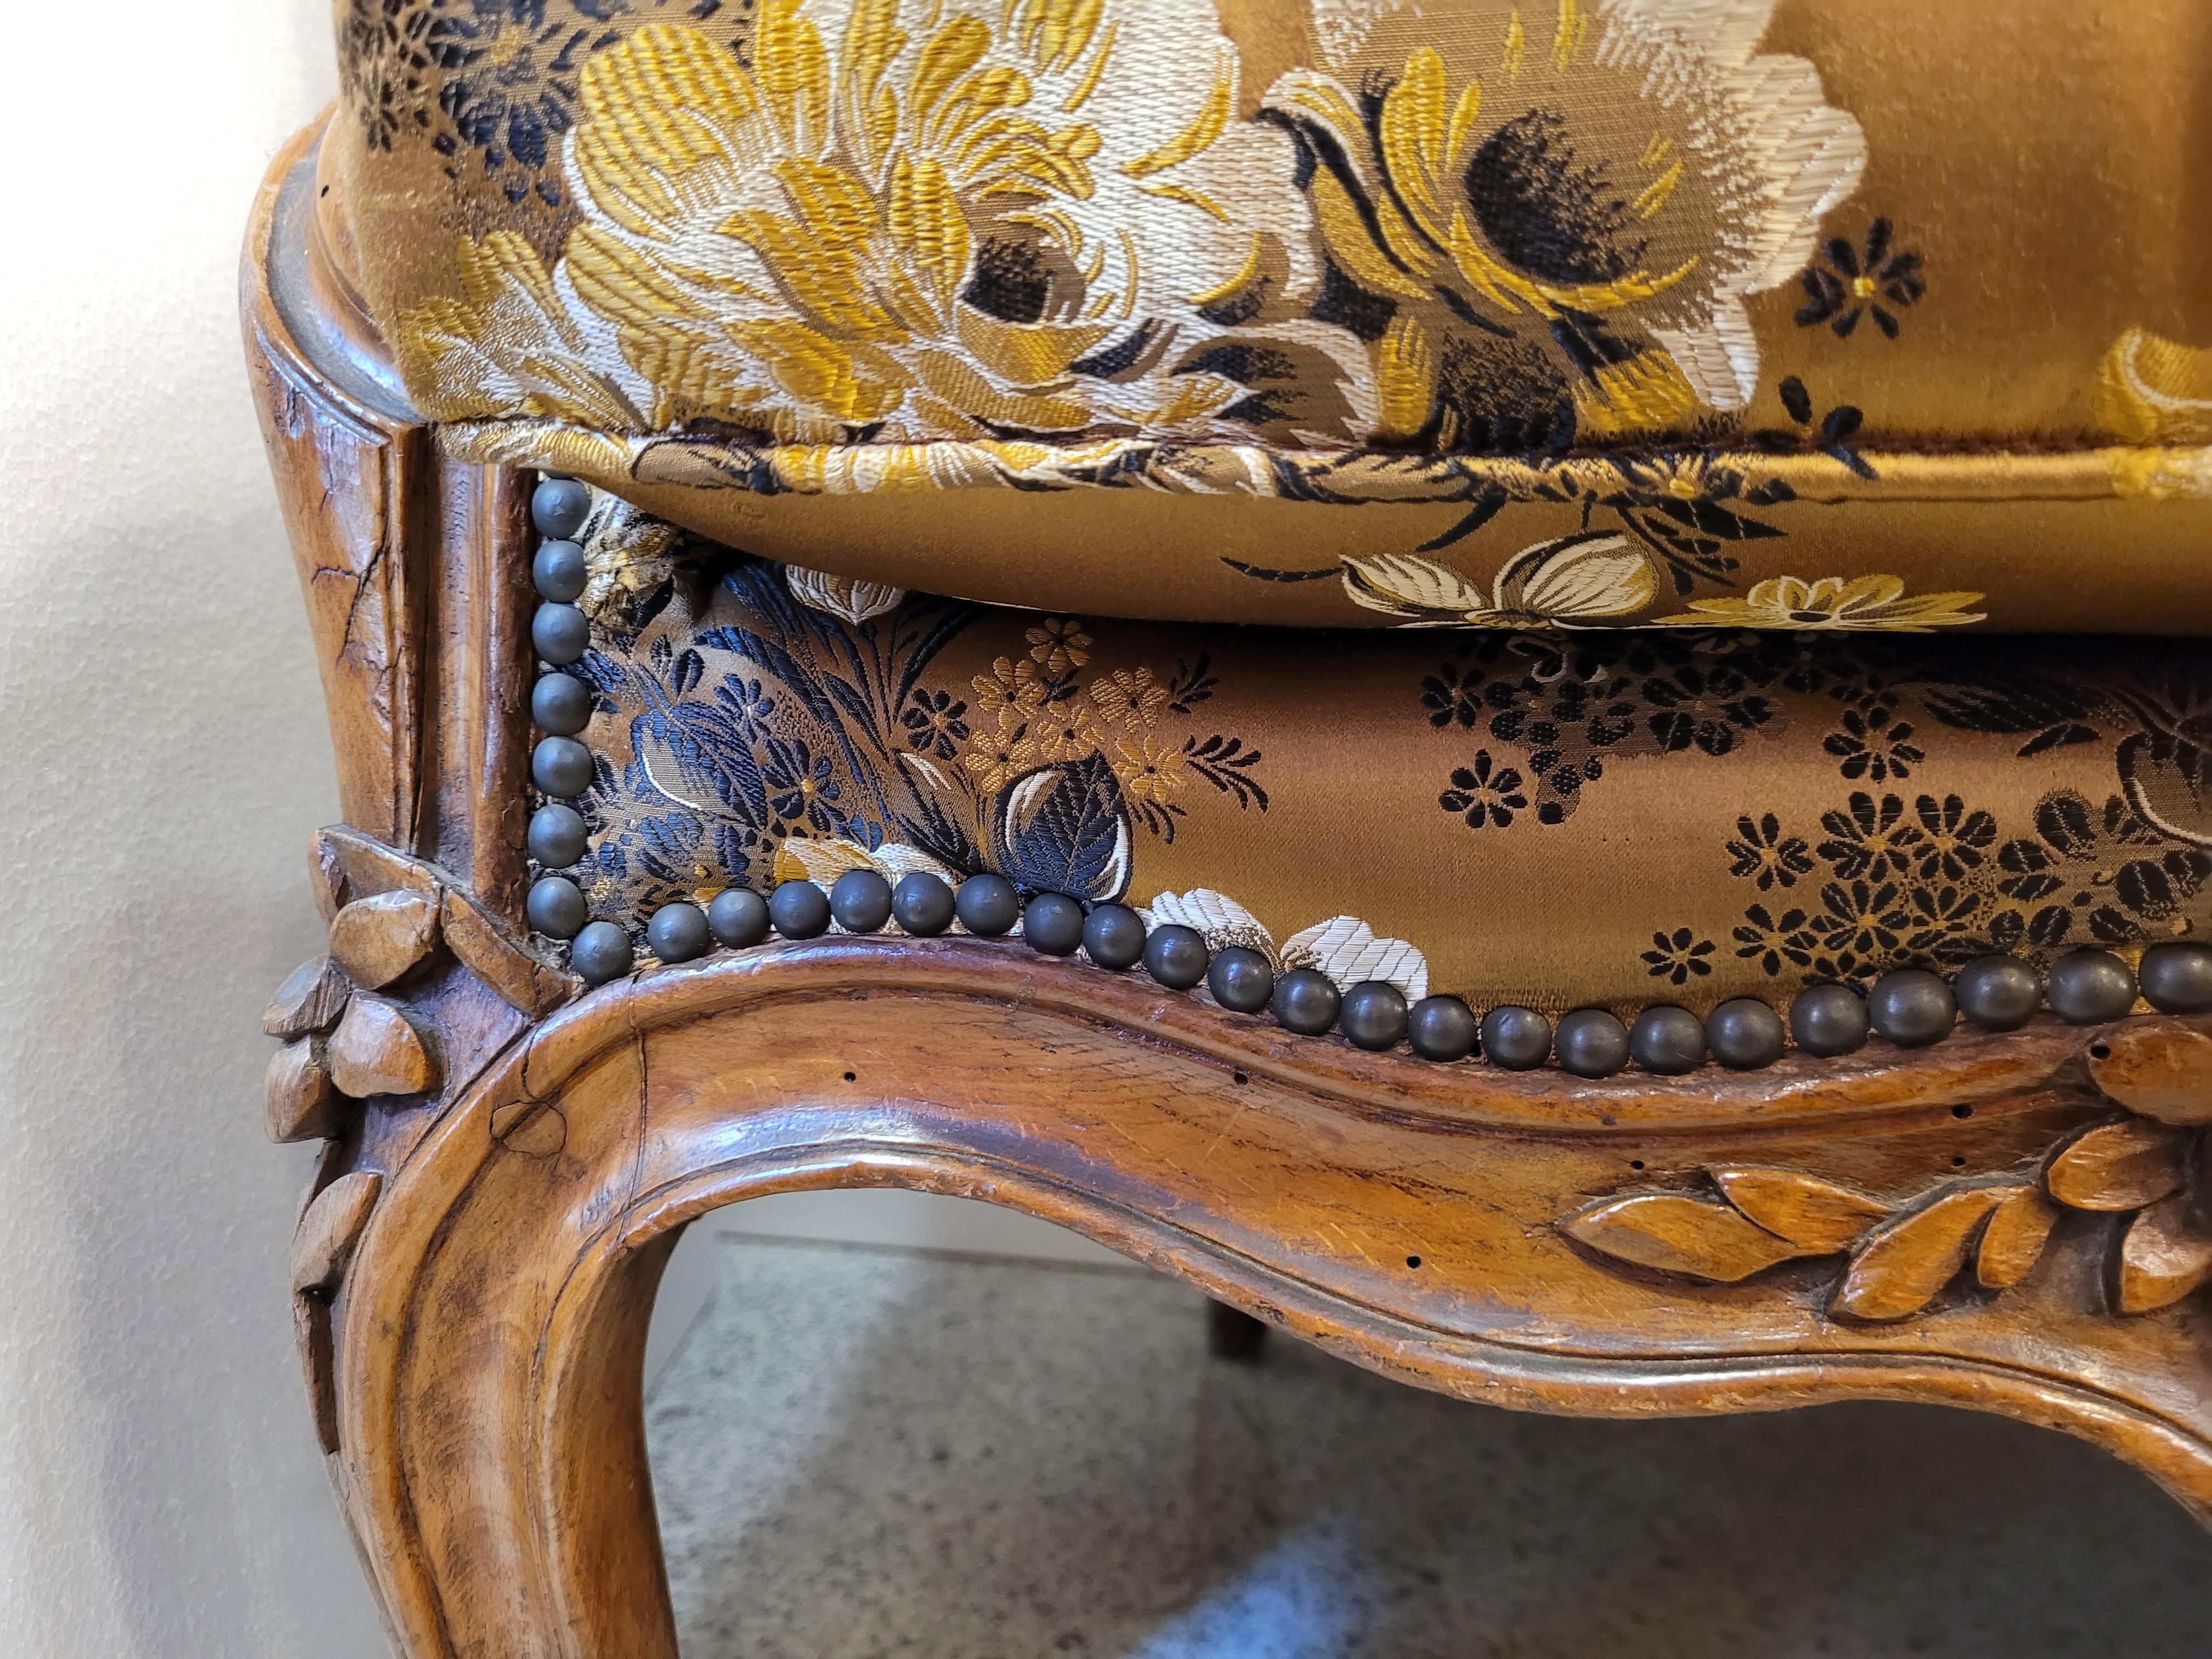 Late 18th Century French Sofa -Canape Luis xv Gold Colour, Wood and Floral Silk